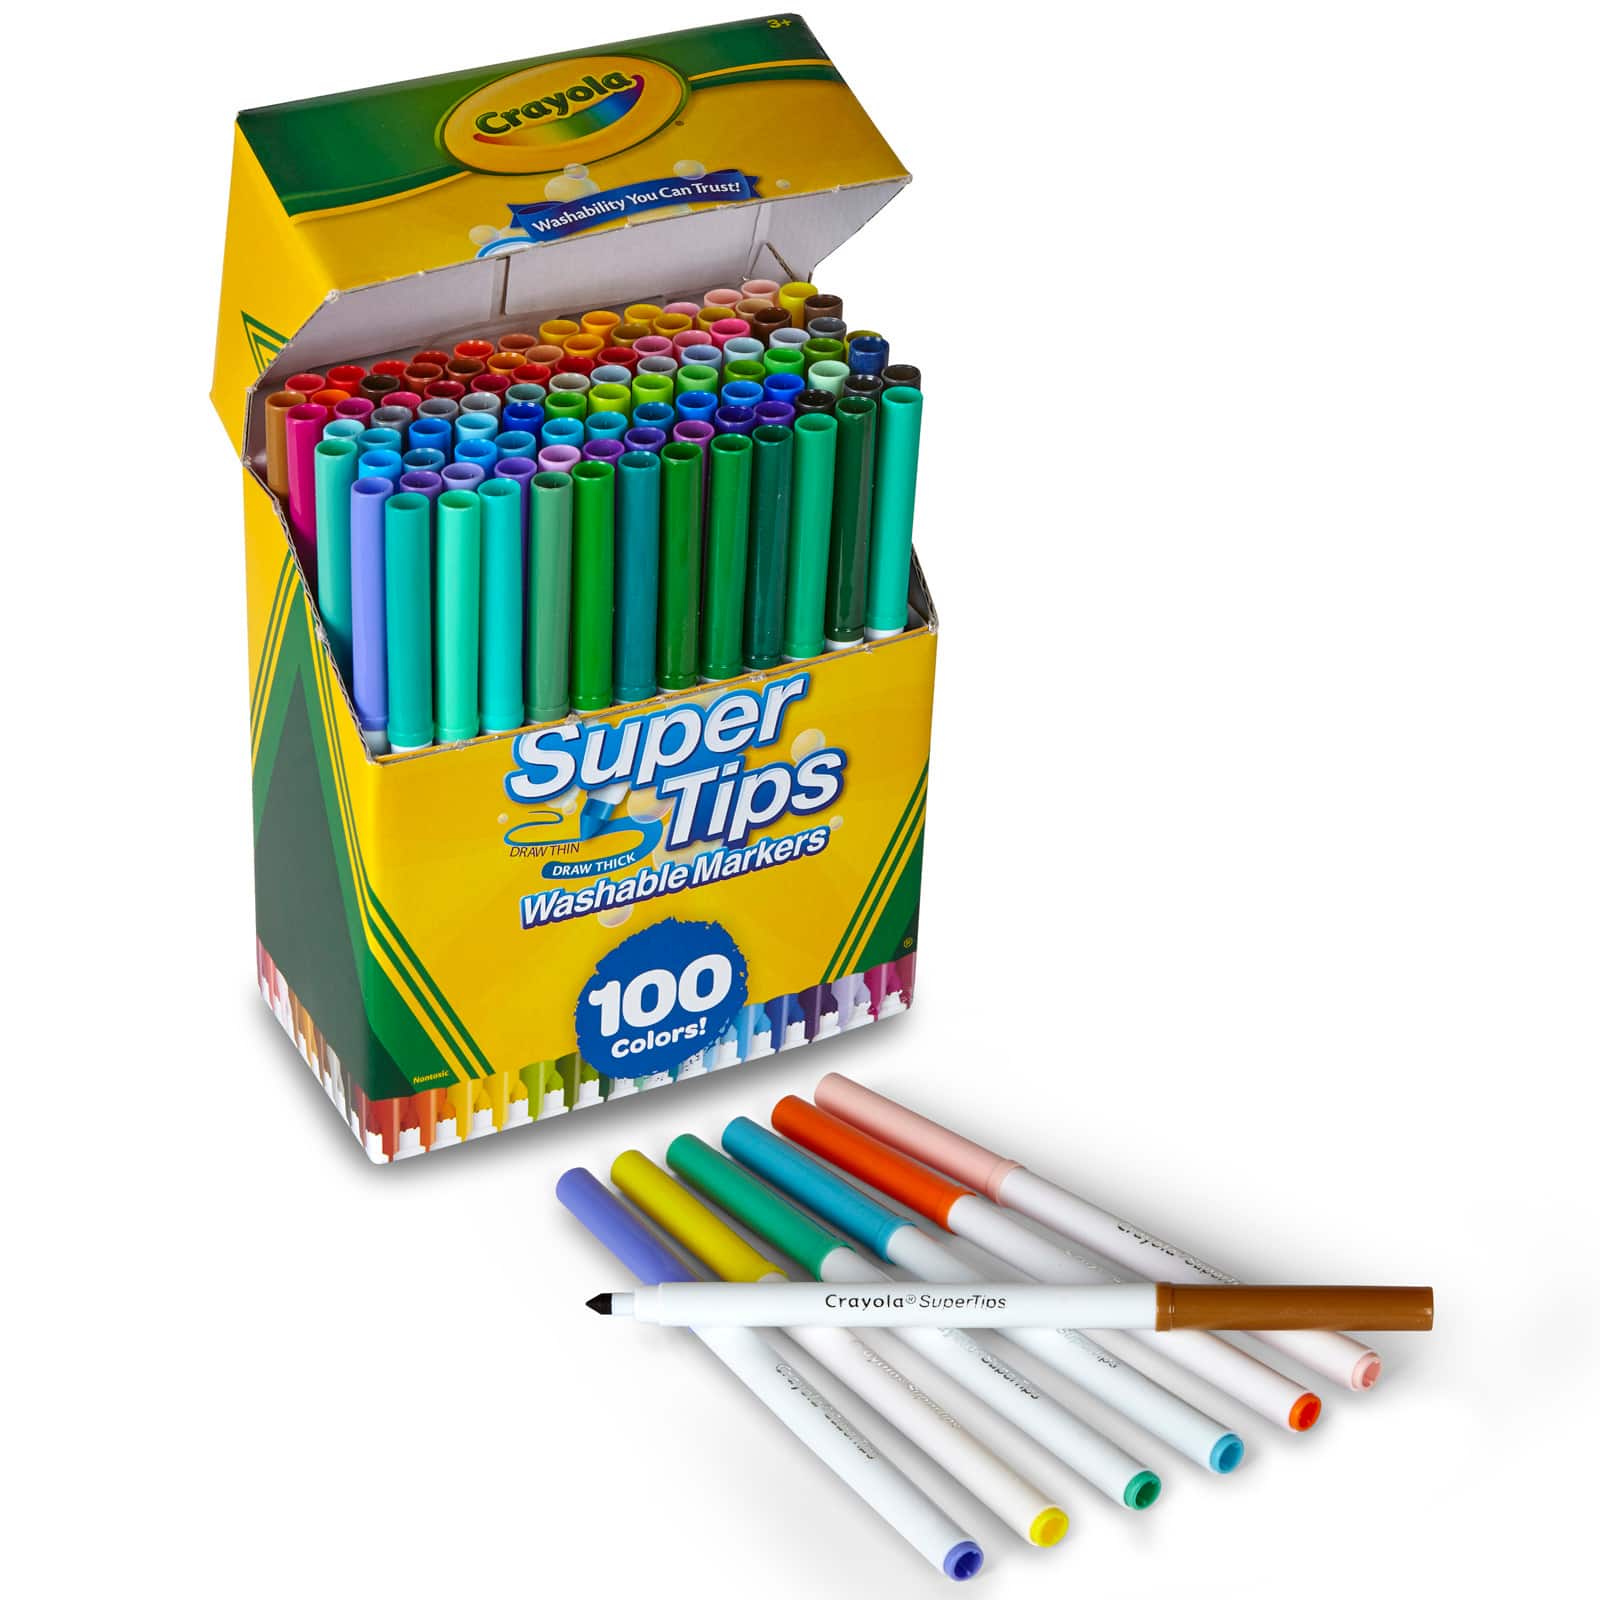 Kay Creates - 86/100 swatches of Crayola Supertips (bought